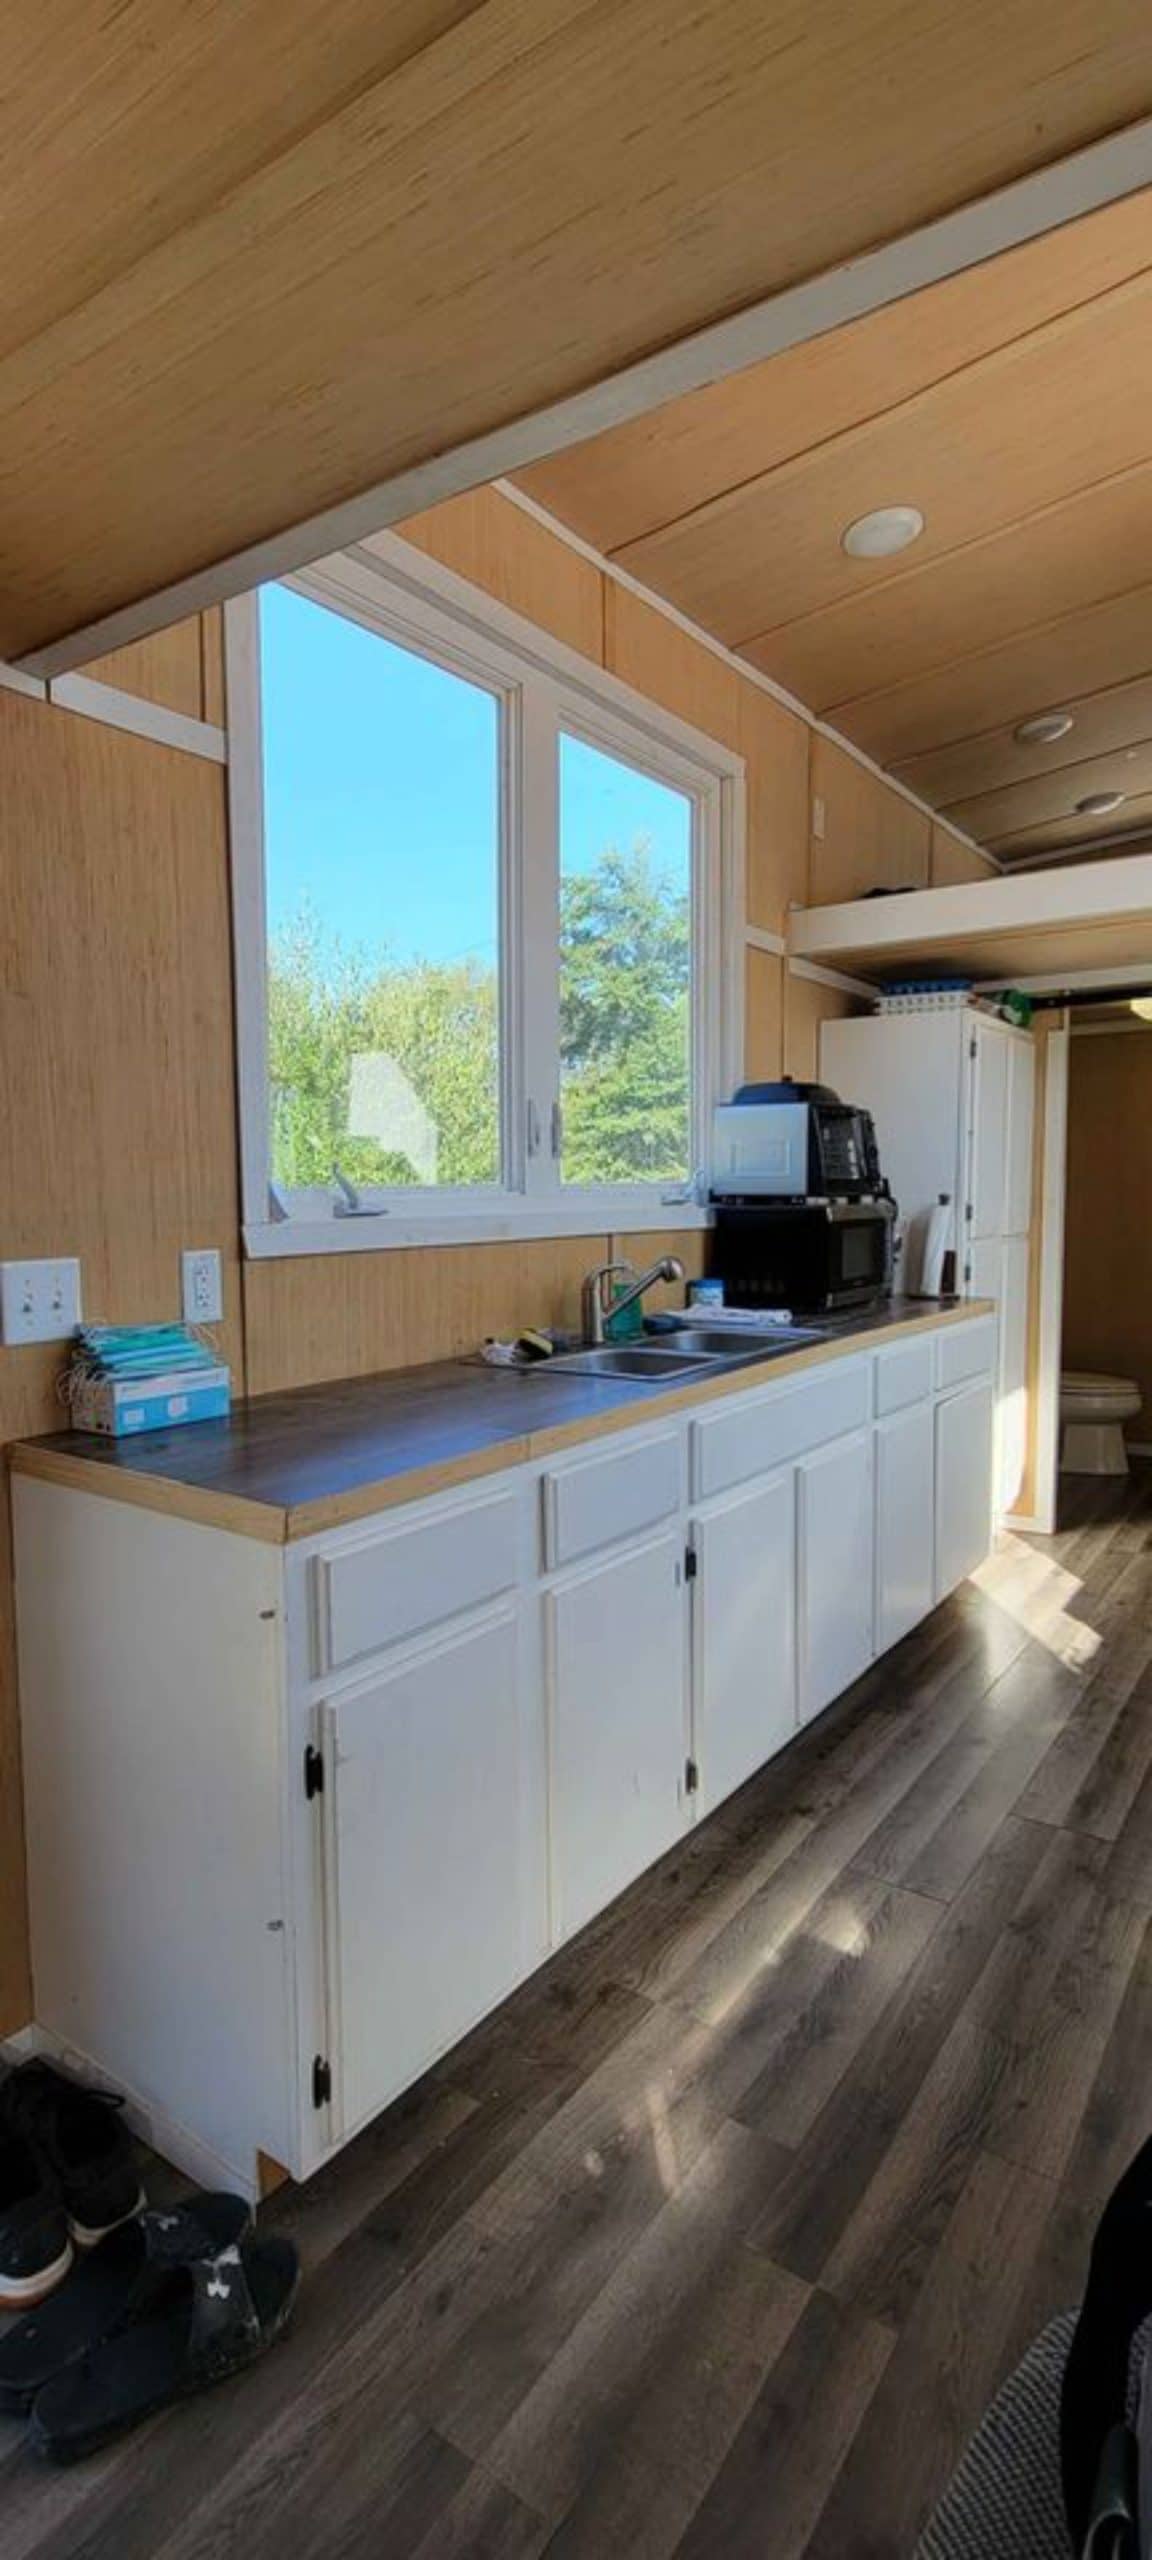 Kitchen area of 28' Budget Friendly Tiny House has countertop, oven and cooktop and lots of storage drawers